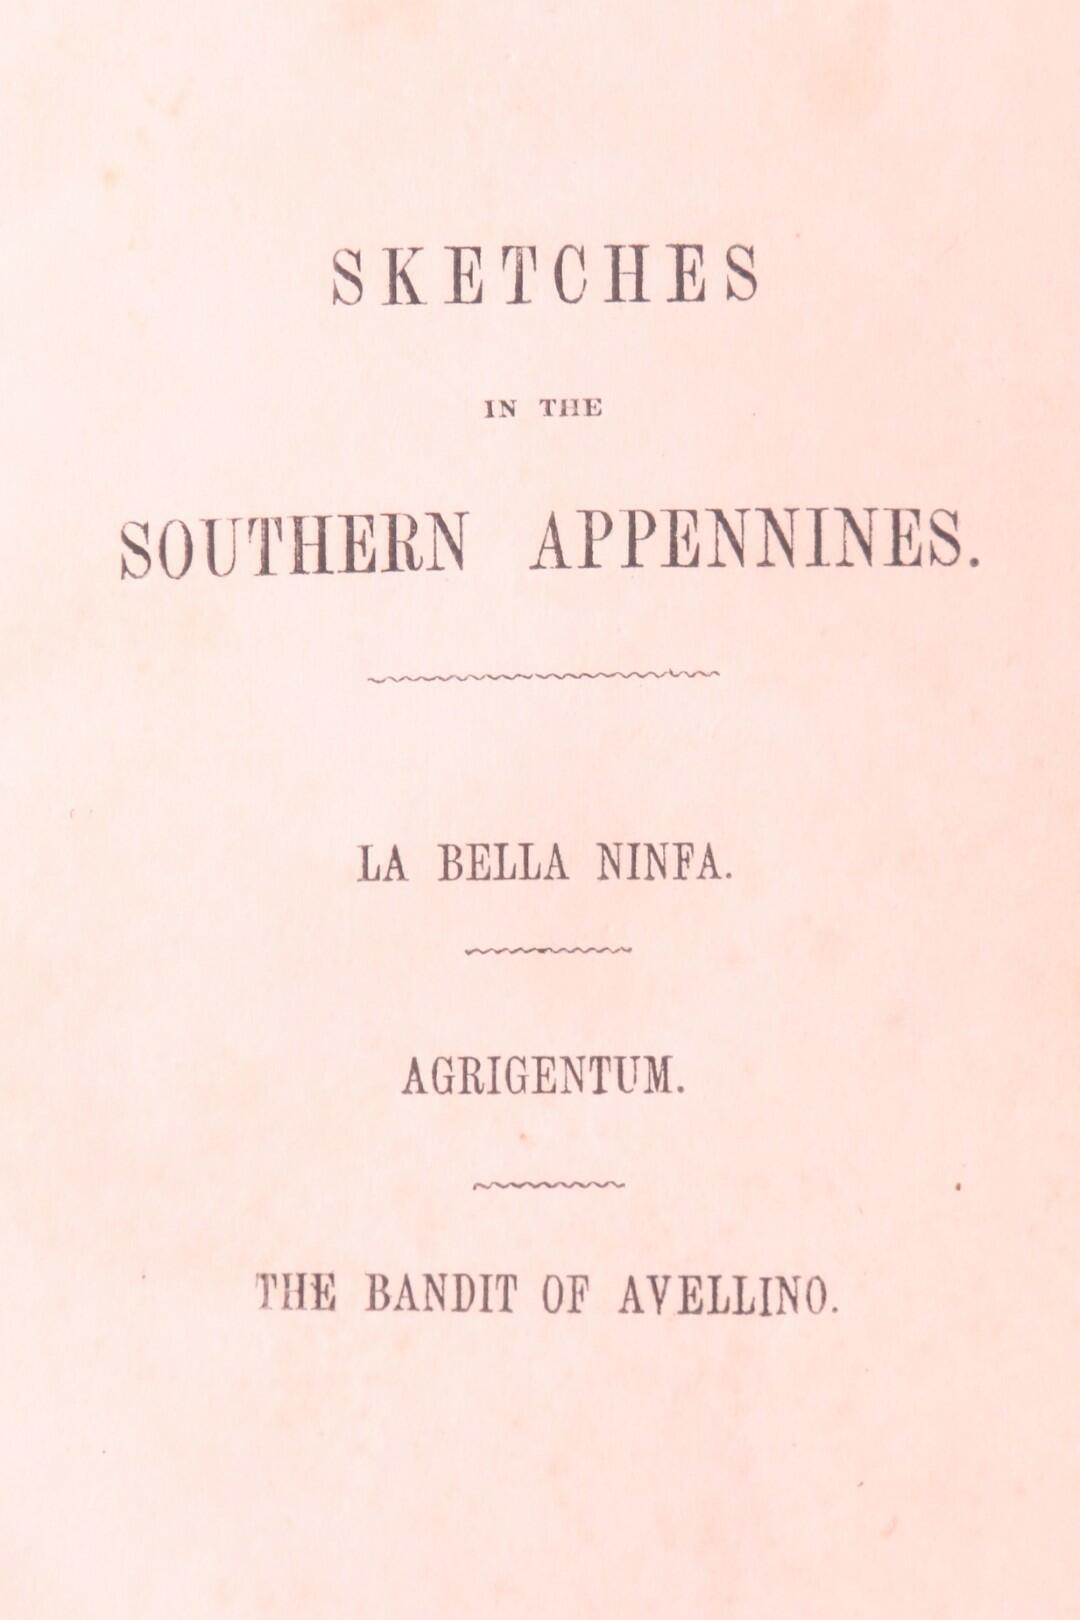 Anonymous - Sketches of the Southern Appennines [sic] [comprising] La Bella Ninfa, Agrigentum, and The Bandit of Avellino - No Publisher, n.d. [c1937], First Edition.